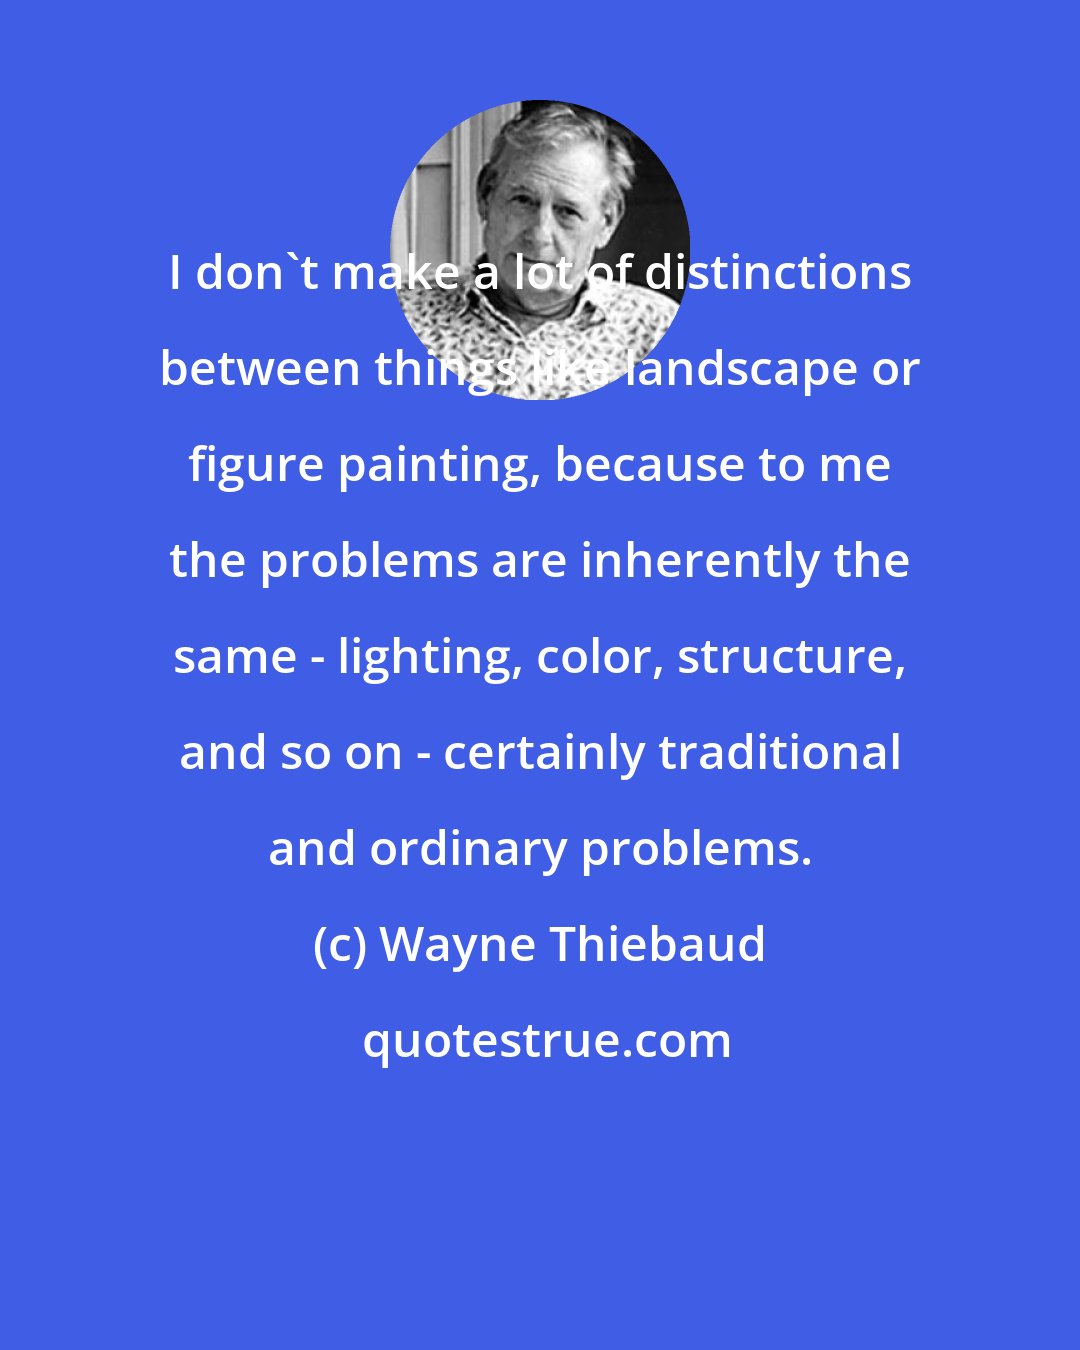 Wayne Thiebaud: I don't make a lot of distinctions between things like landscape or figure painting, because to me the problems are inherently the same - lighting, color, structure, and so on - certainly traditional and ordinary problems.